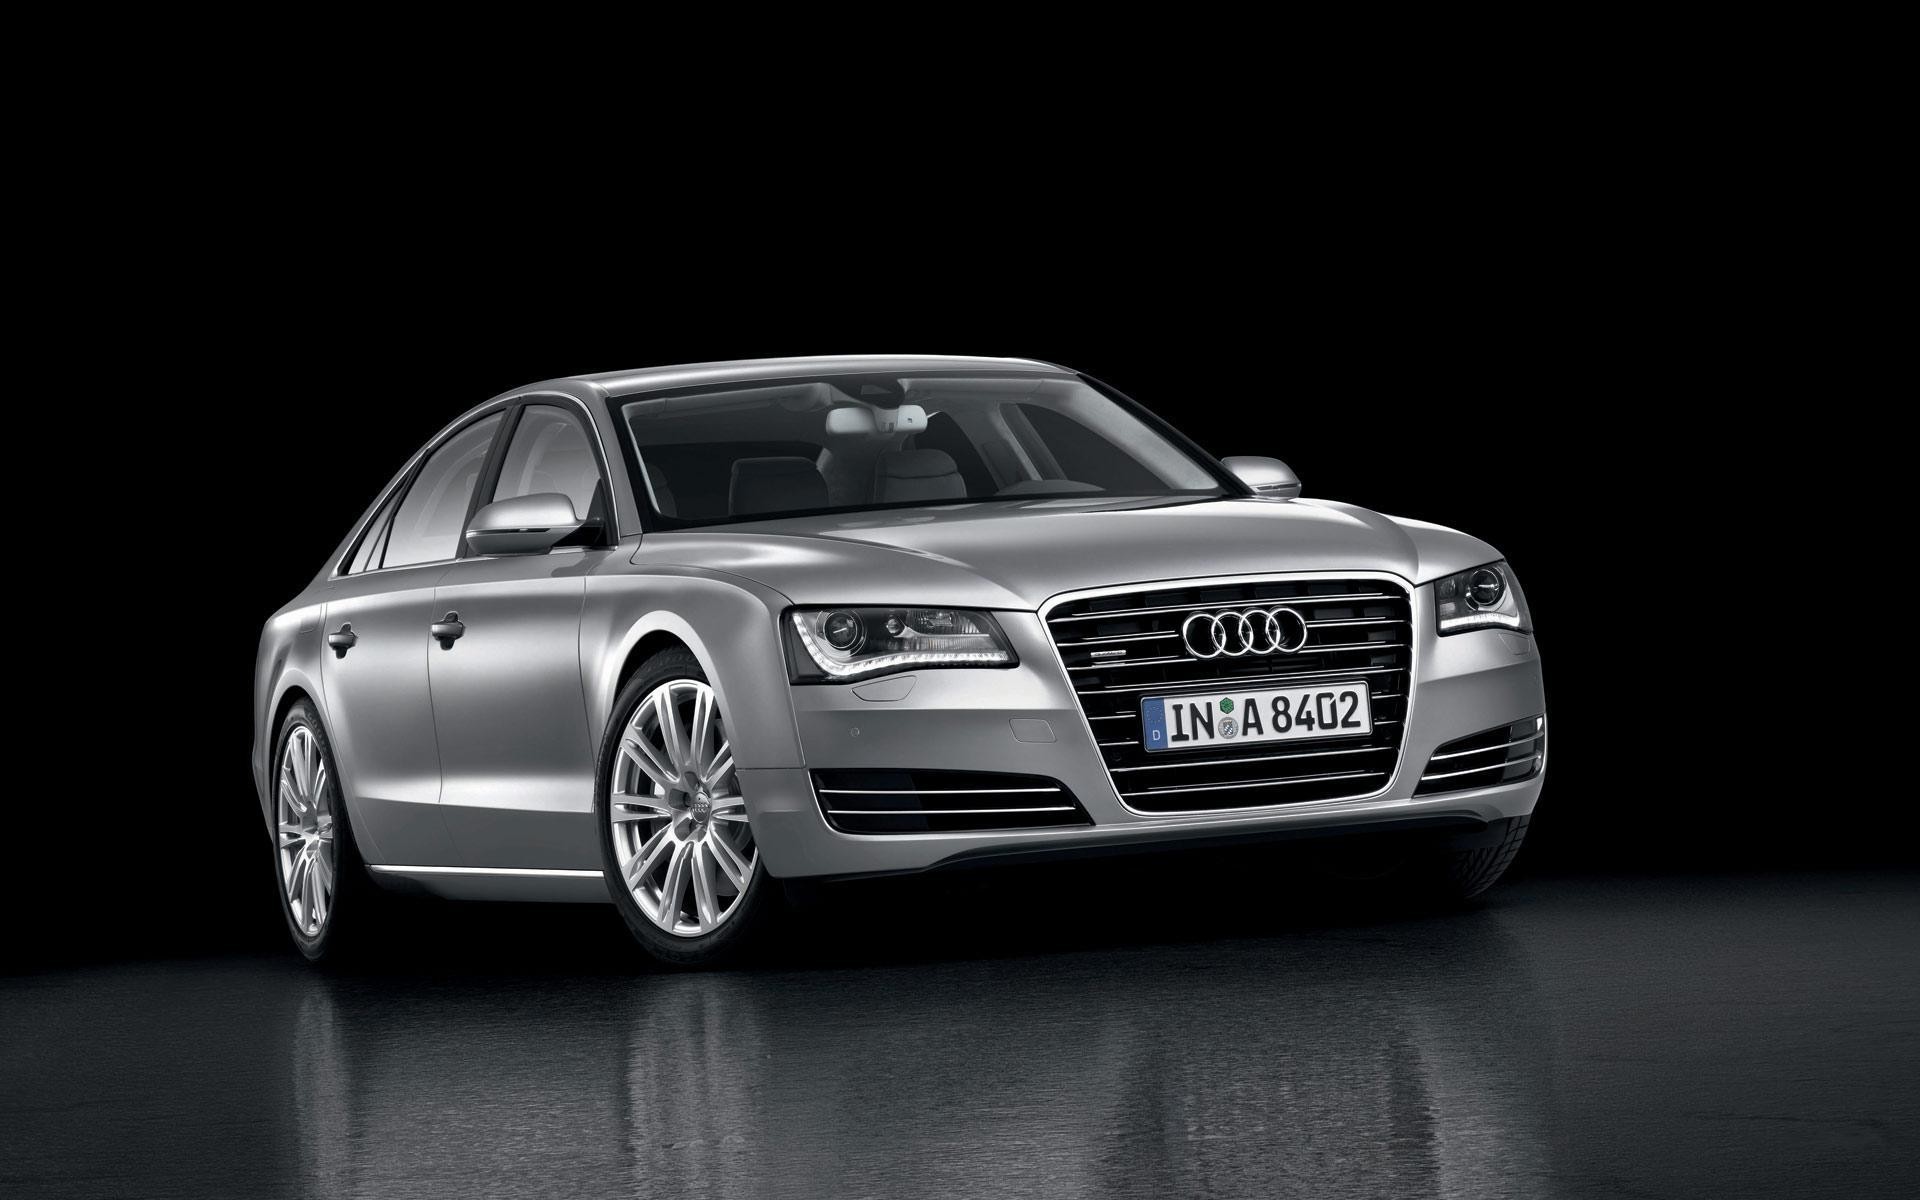 General 1920x1200 car silver cars numbers Audi vehicle simple background black background